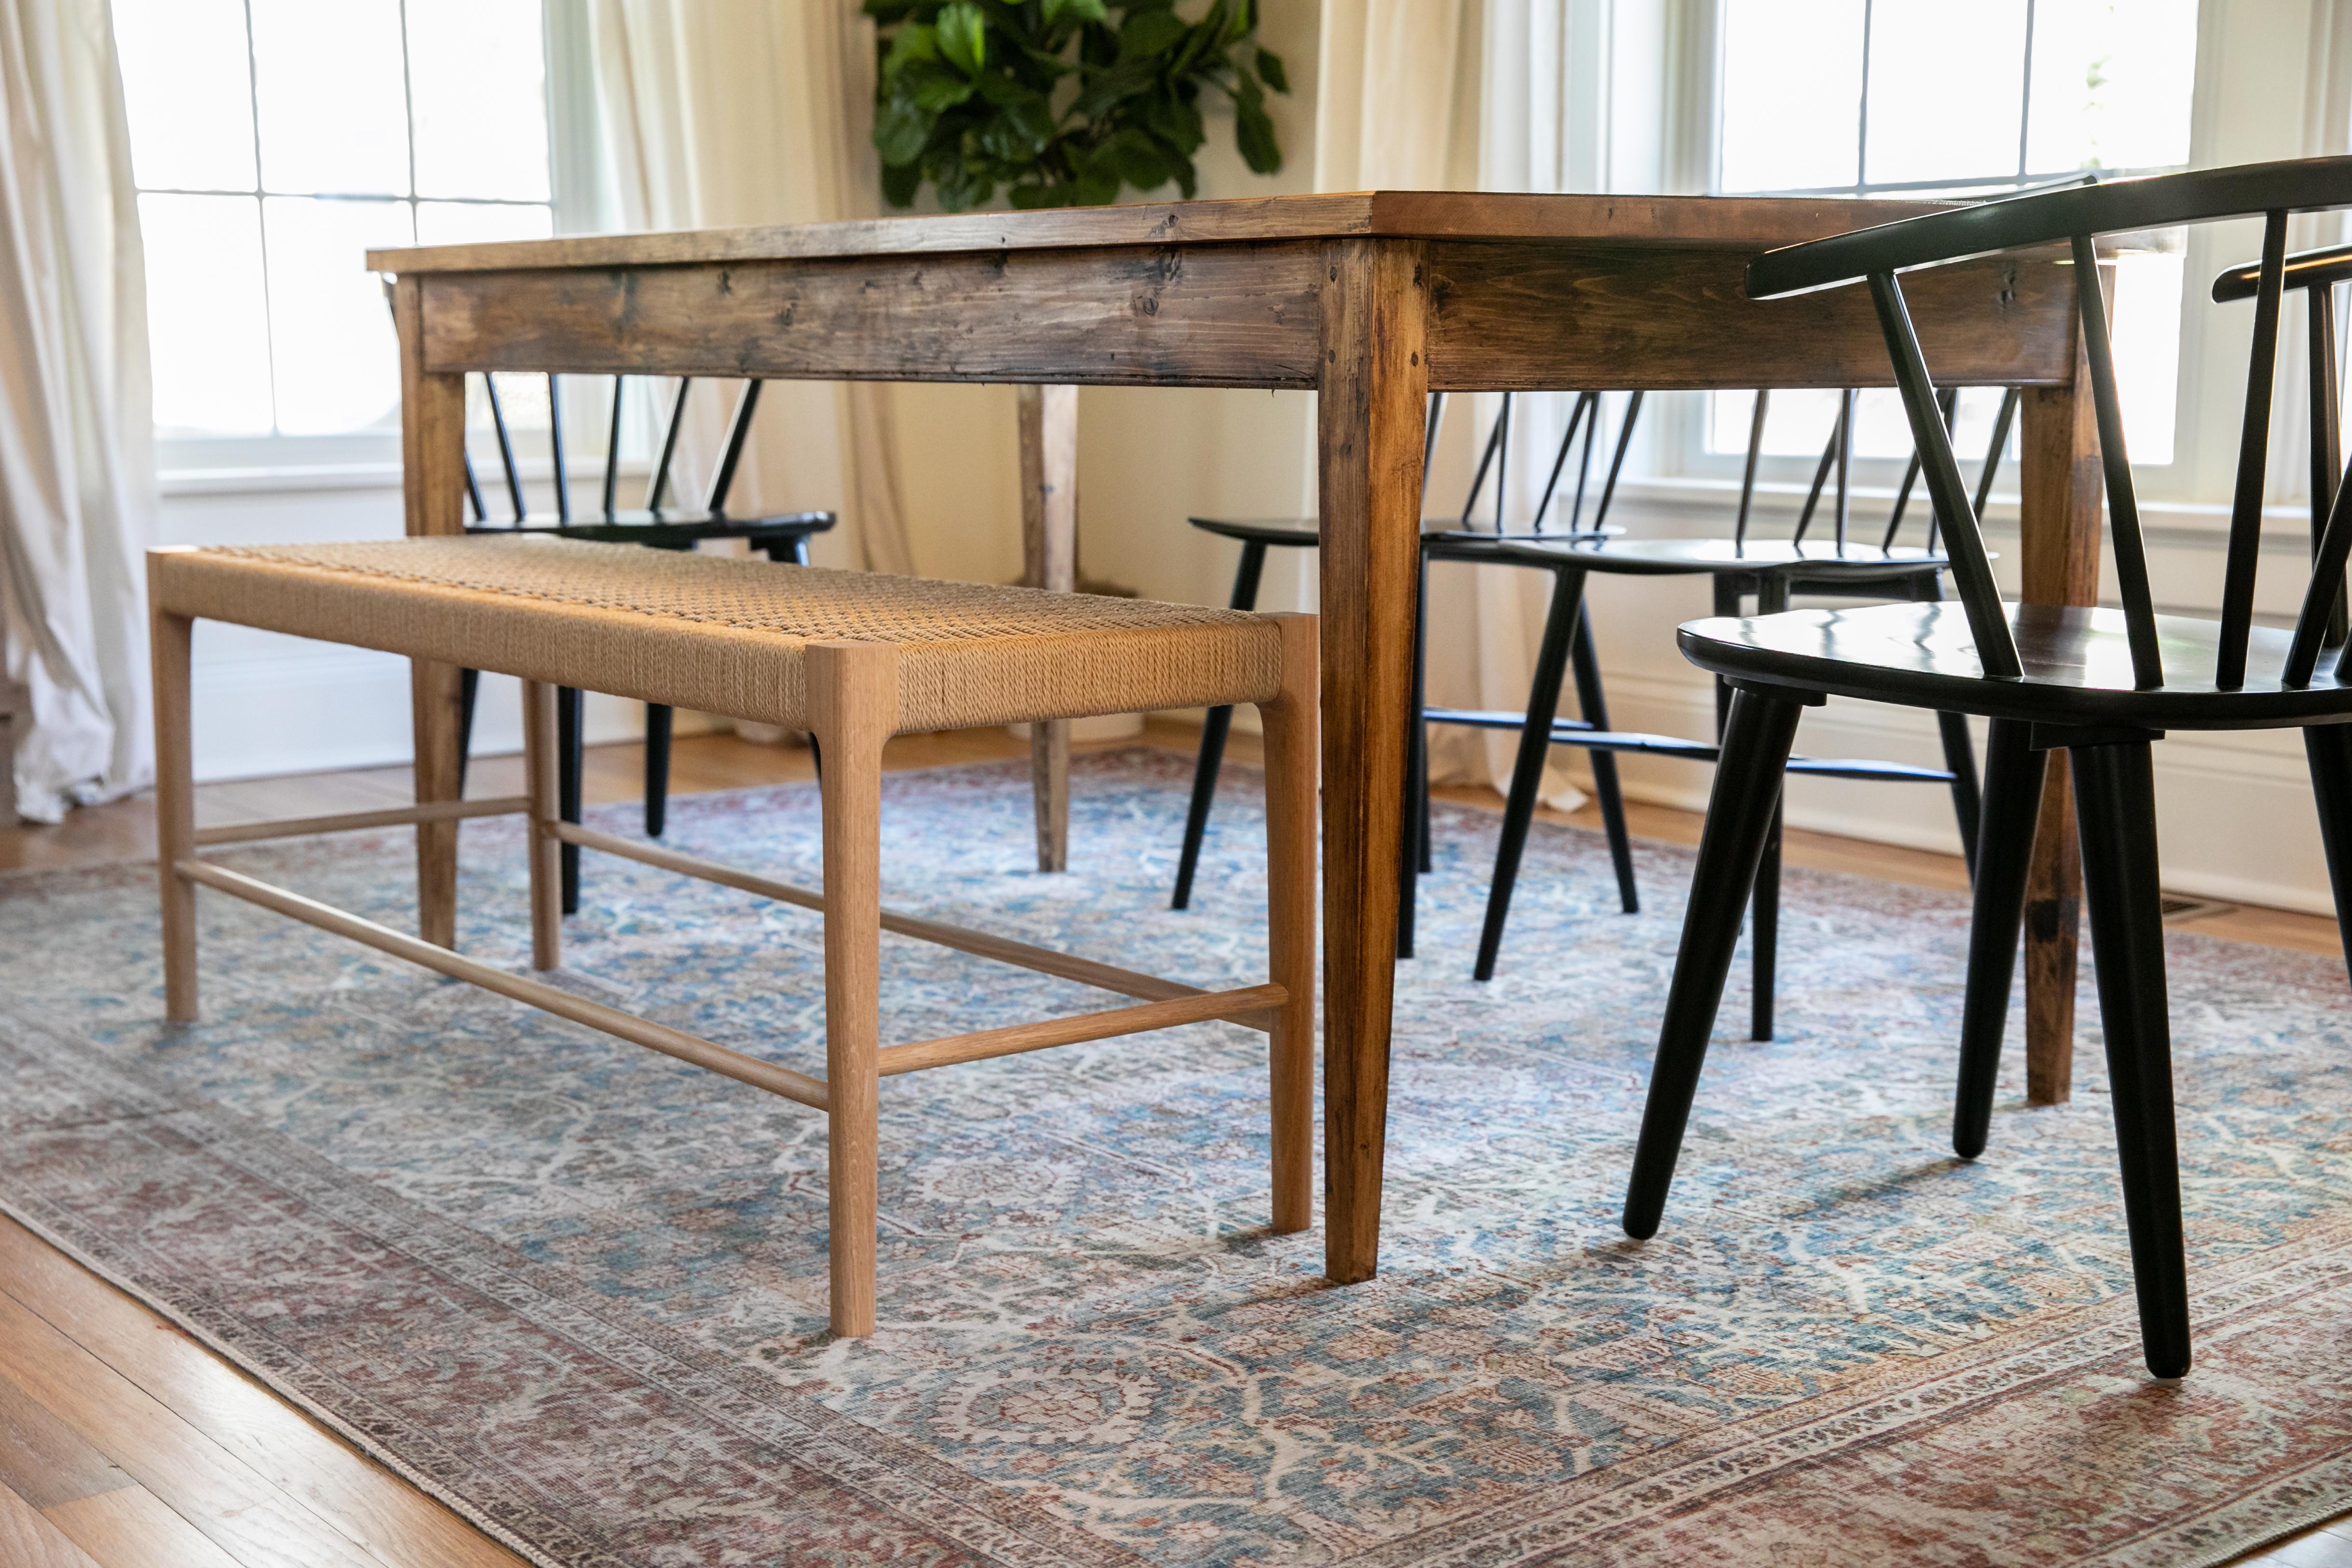 Beaded Adair Table, Refined English Rustic Dining Table in Spruce